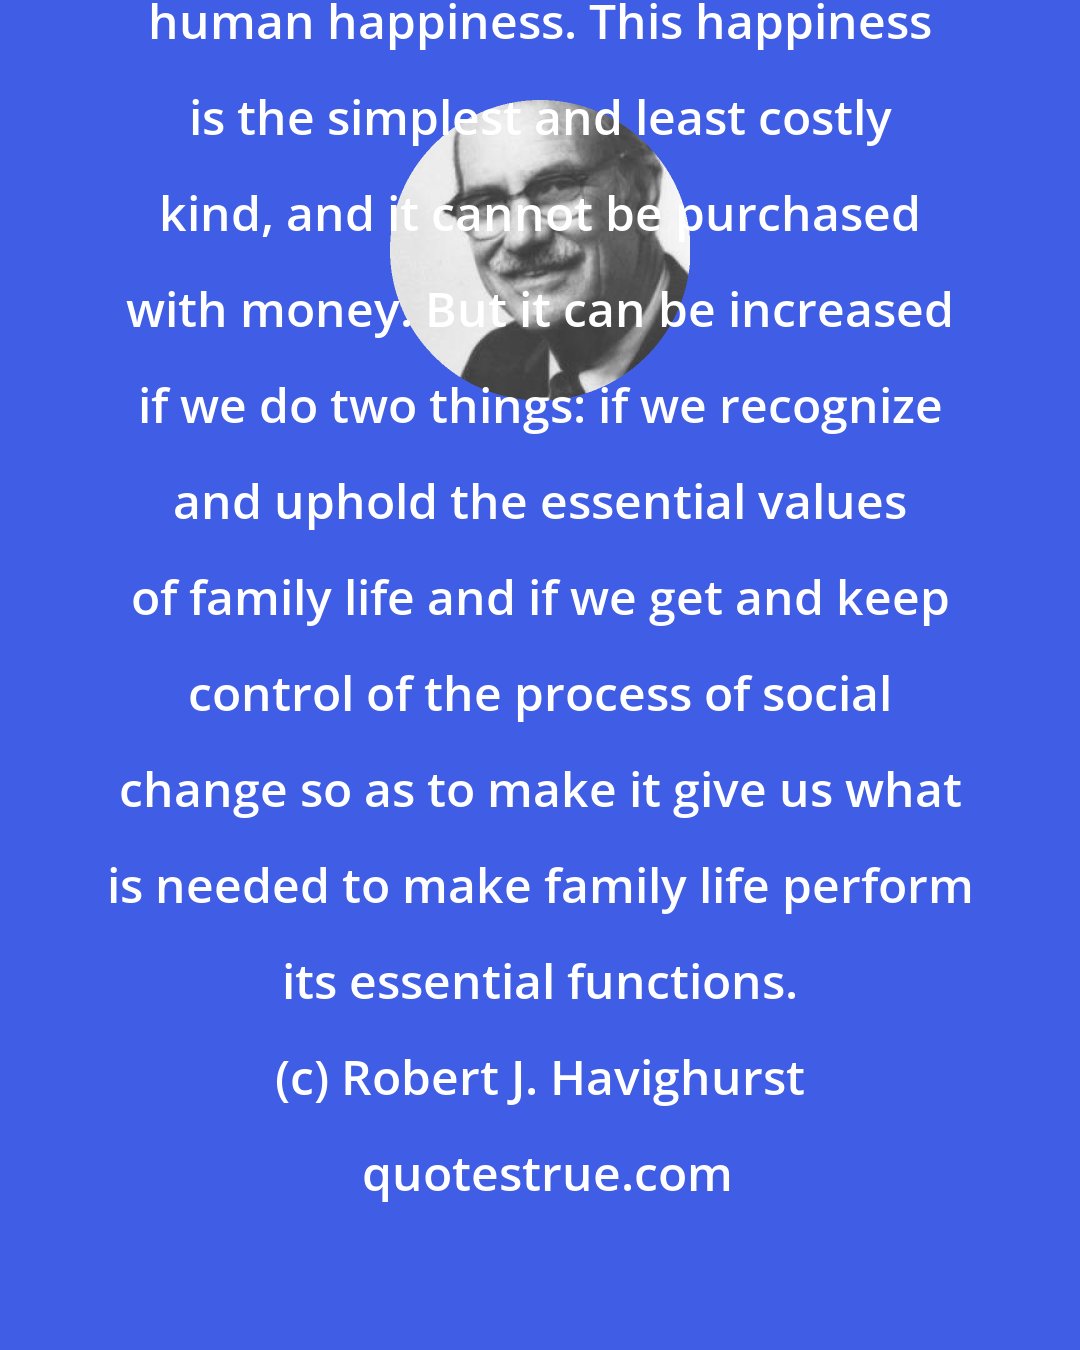 Robert J. Havighurst: Family life is the source of the greatest human happiness. This happiness is the simplest and least costly kind, and it cannot be purchased with money. But it can be increased if we do two things: if we recognize and uphold the essential values of family life and if we get and keep control of the process of social change so as to make it give us what is needed to make family life perform its essential functions.